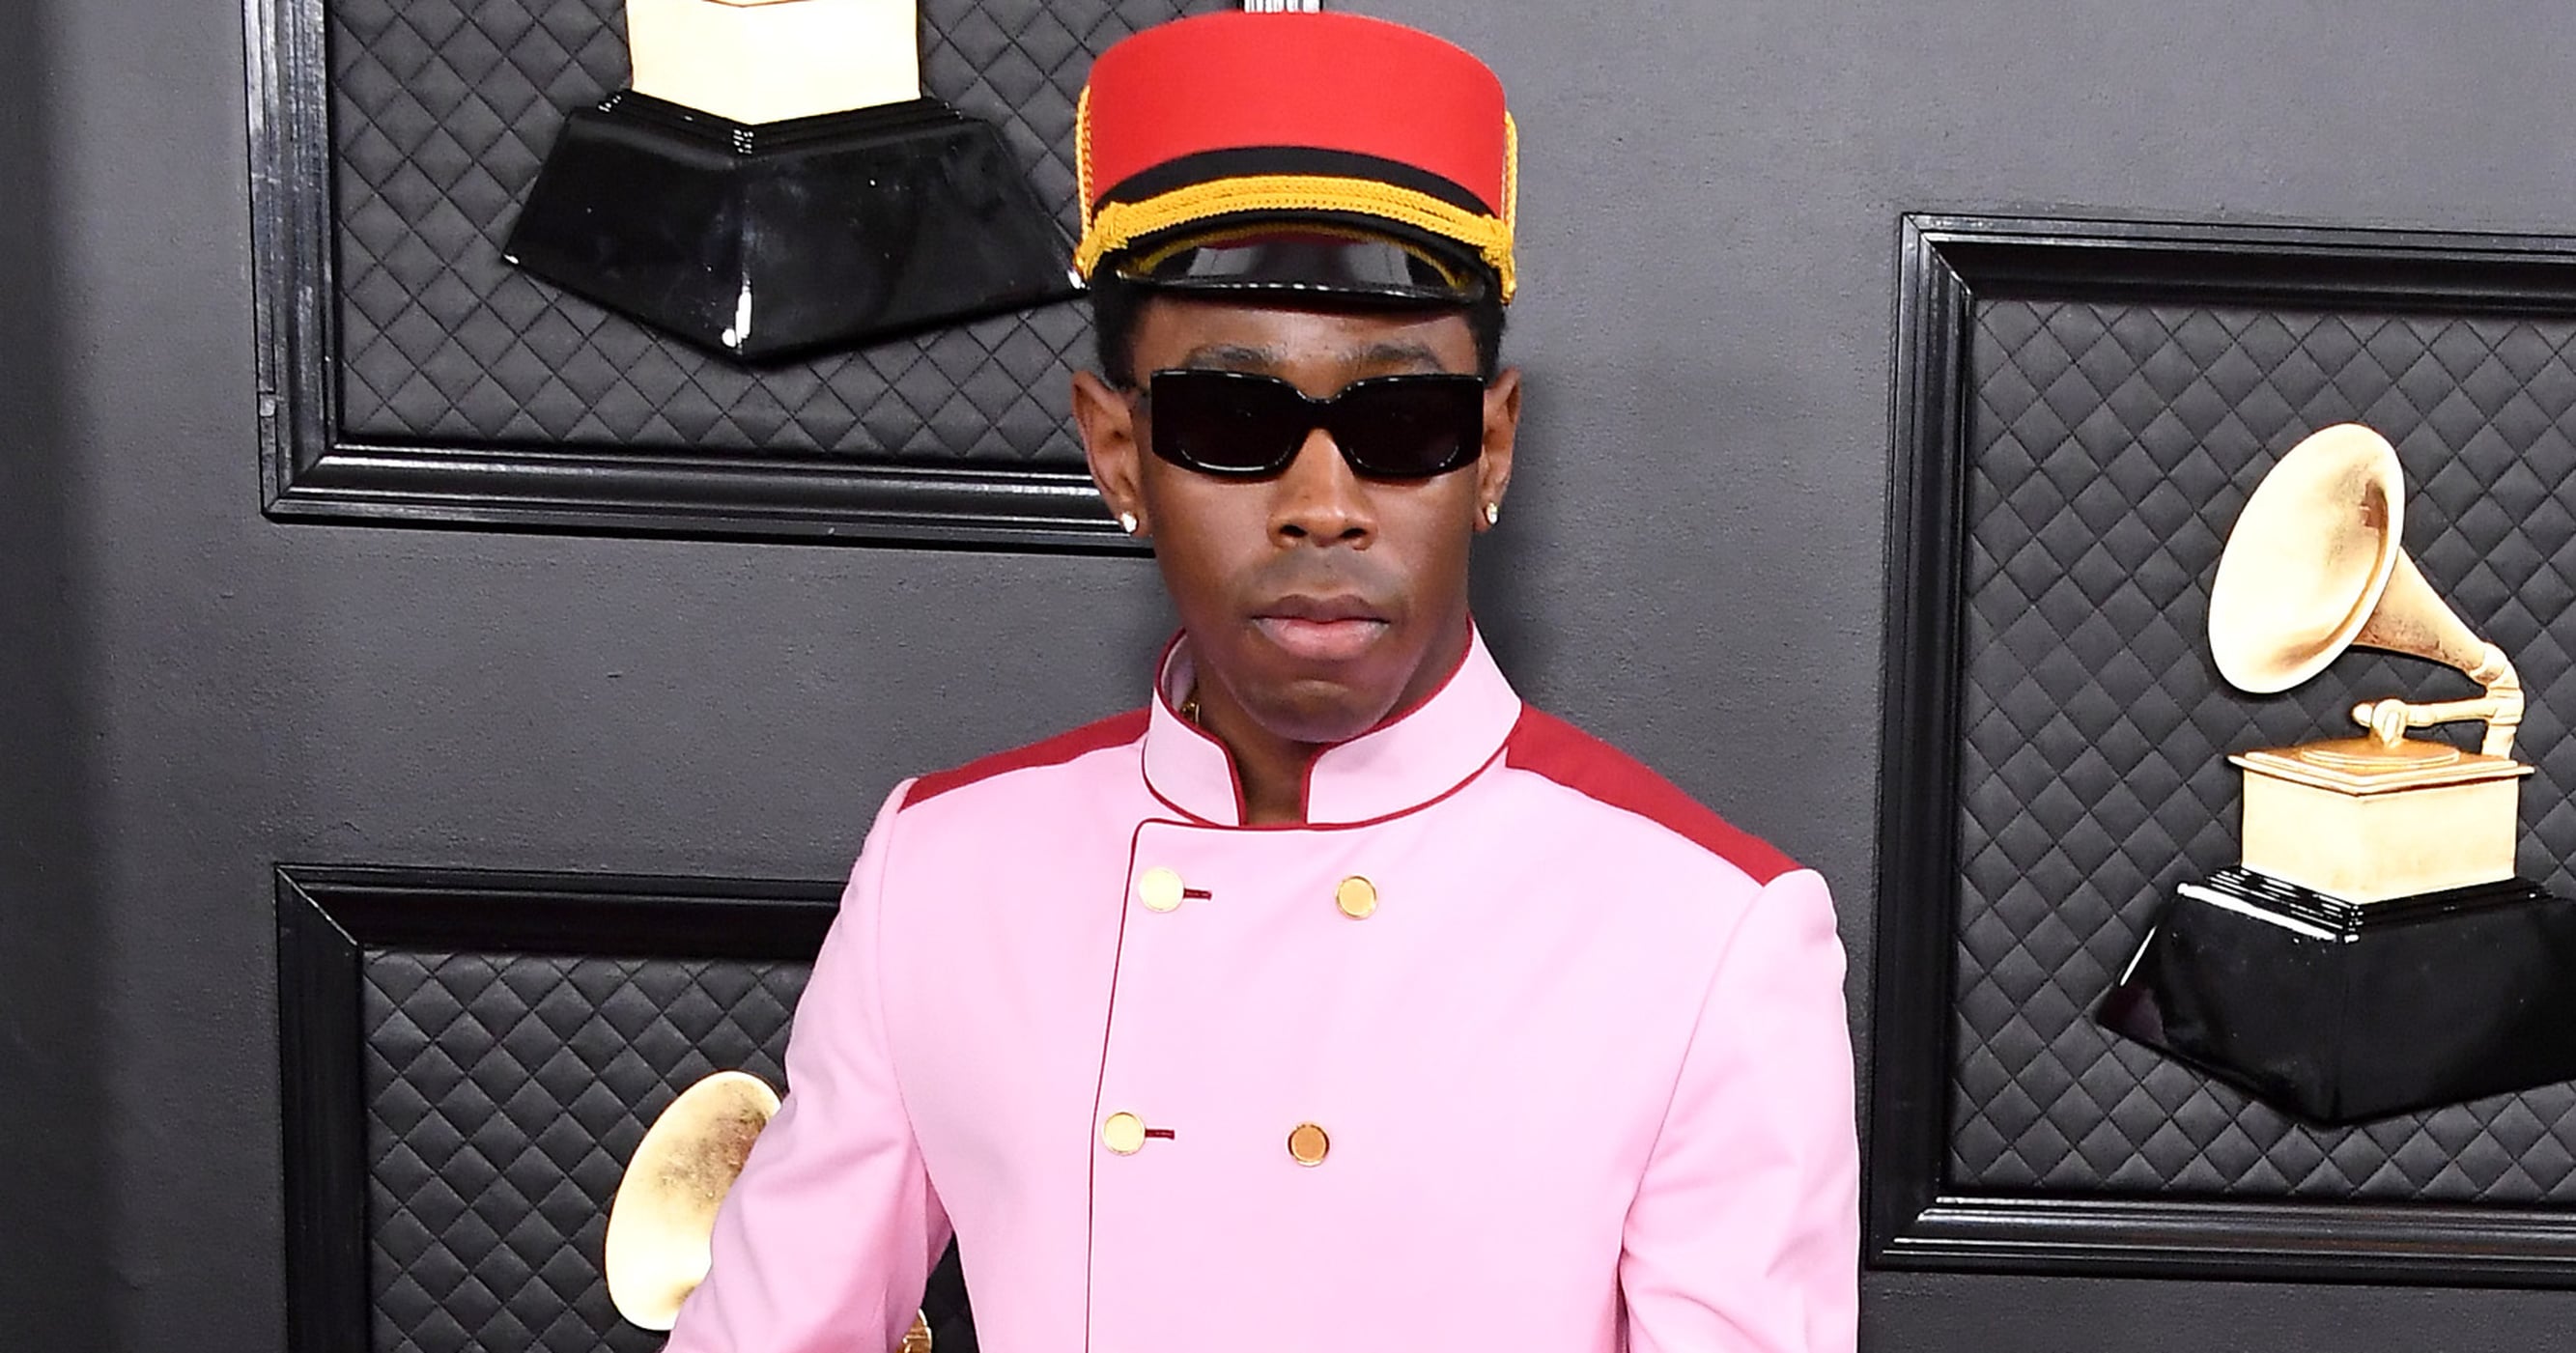 This week in LA, Tyler, the Creator (@feliciathegoat) was spotted